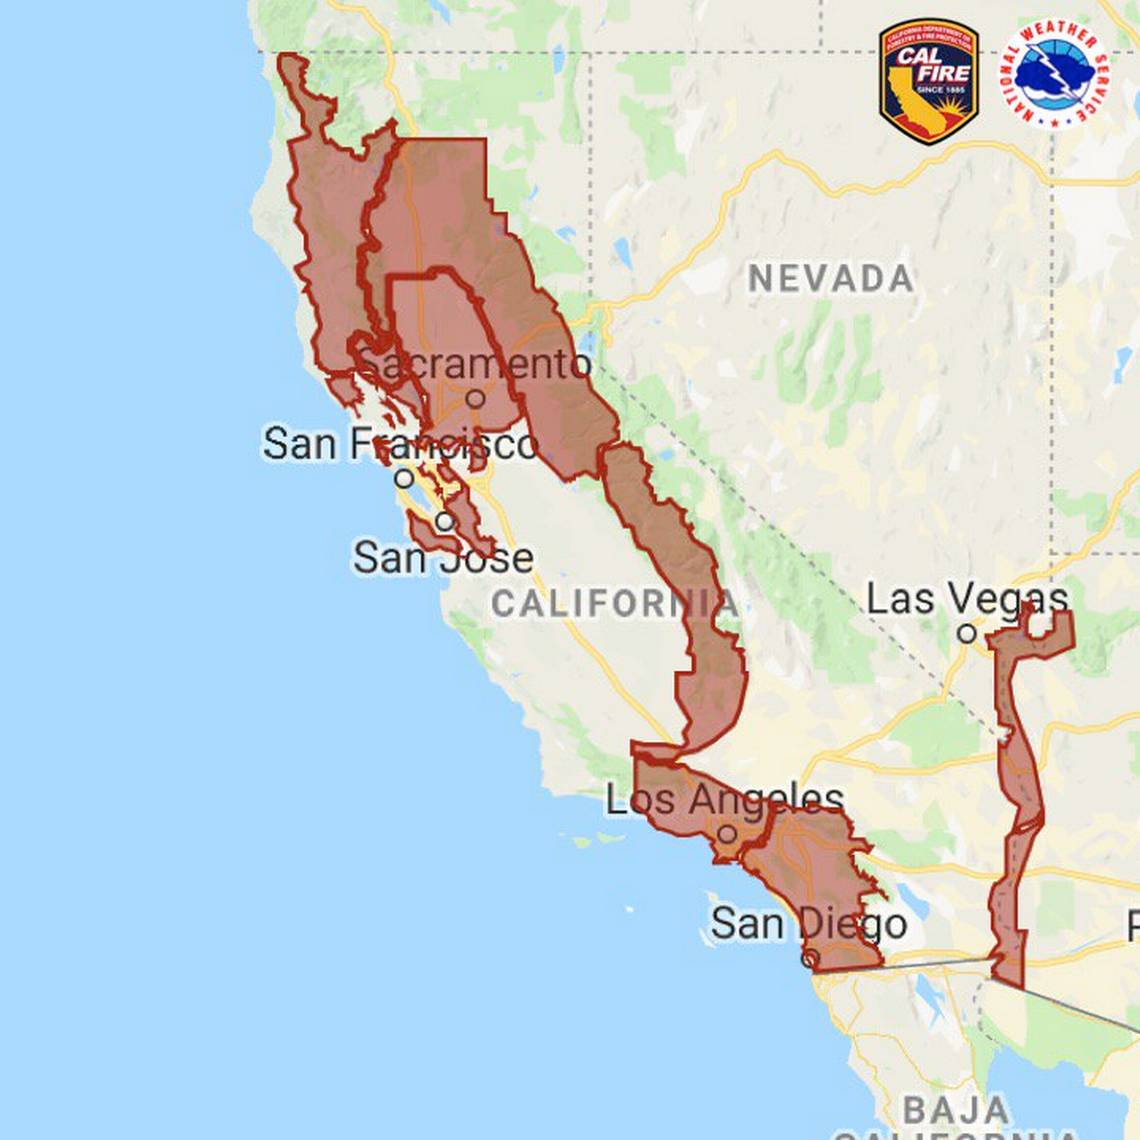 California Wildfire Updates | Red Flag Wind Warning Extended | The - California Forest Fire Map